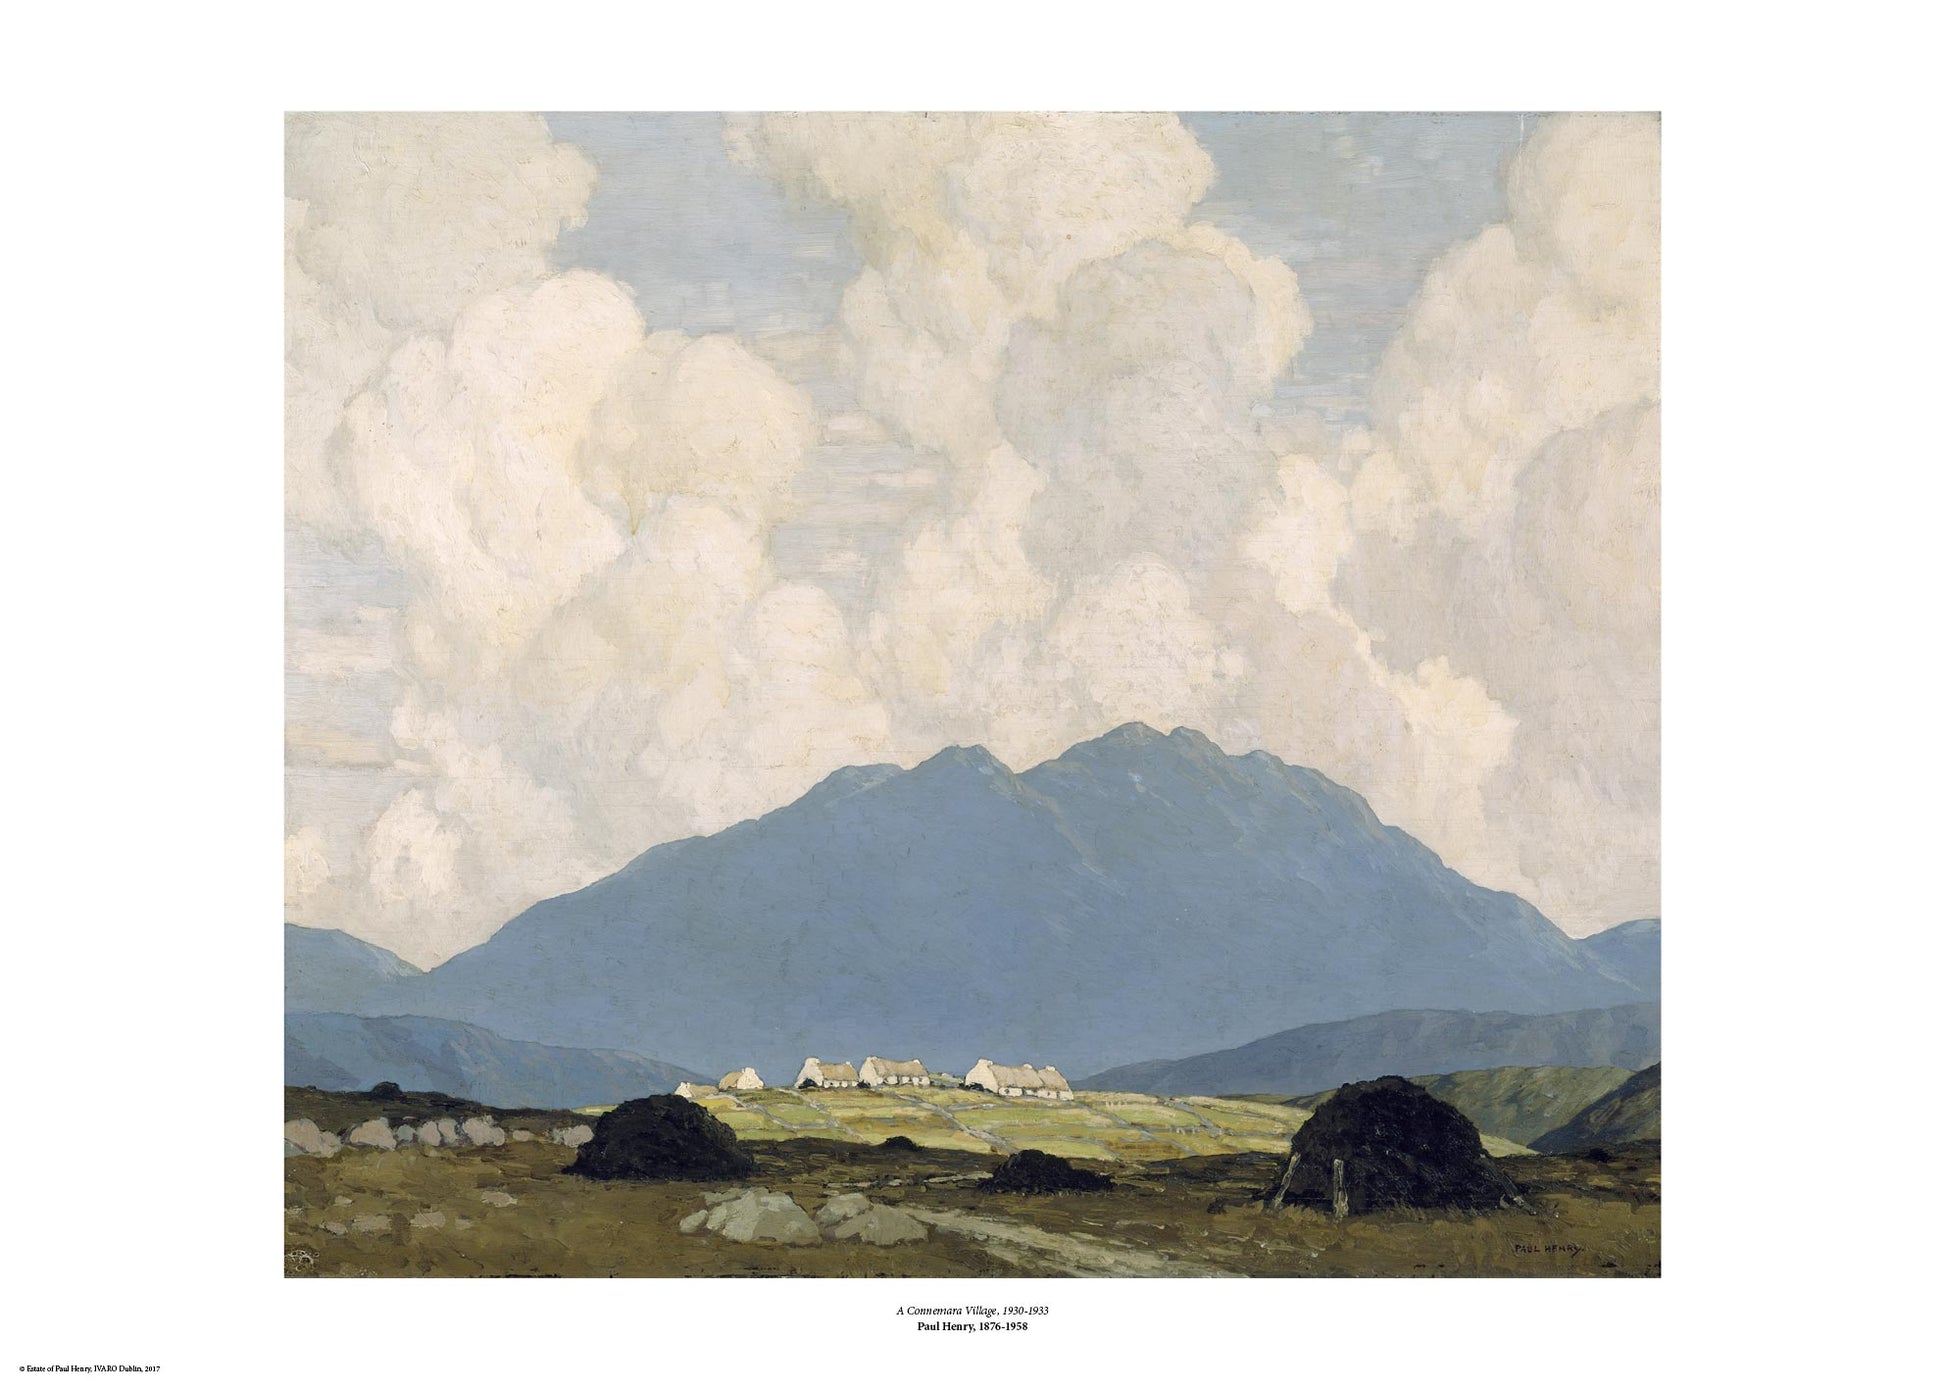 A cloud filled sky takes up half the painting with a muted mountain silhouette taking up another third of the image. A handful of small cottages are visible in the distance standing out against the dark of the distant mountain. The painting is surrounded by a white border with its name and painter at bottom centre.